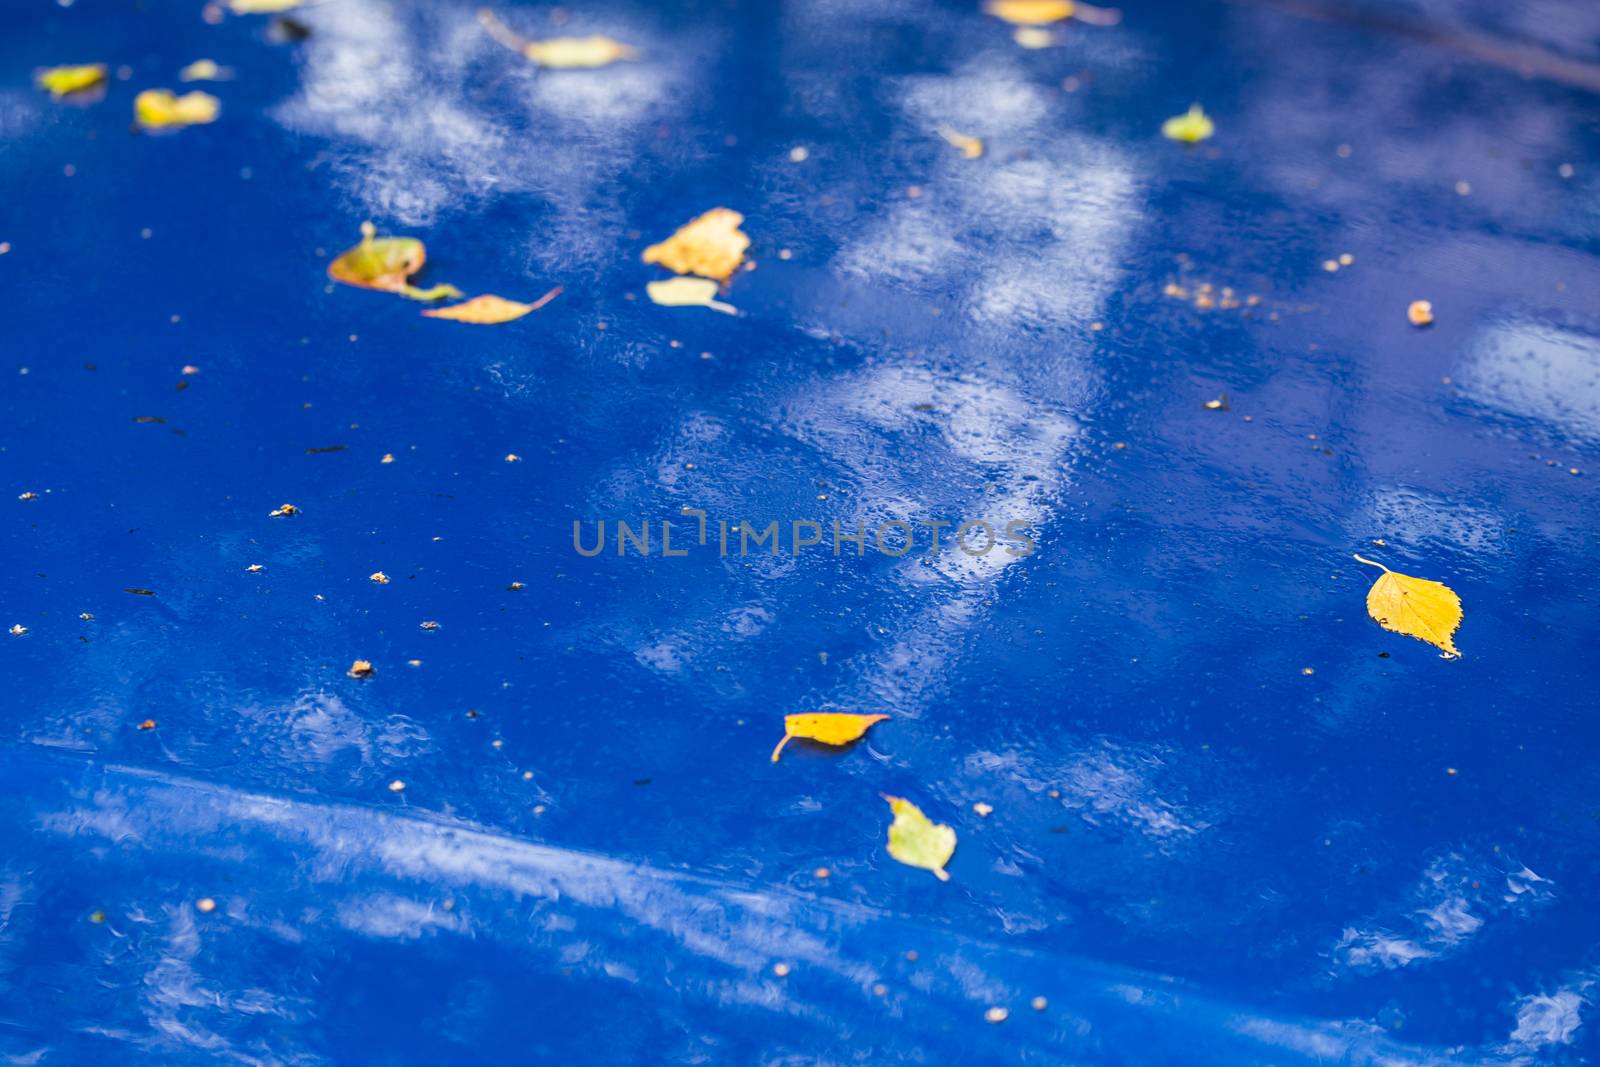 wet sapphire blue car surface at autumn rainy day with yellow birch leaves - selective focus with blur closeup composition